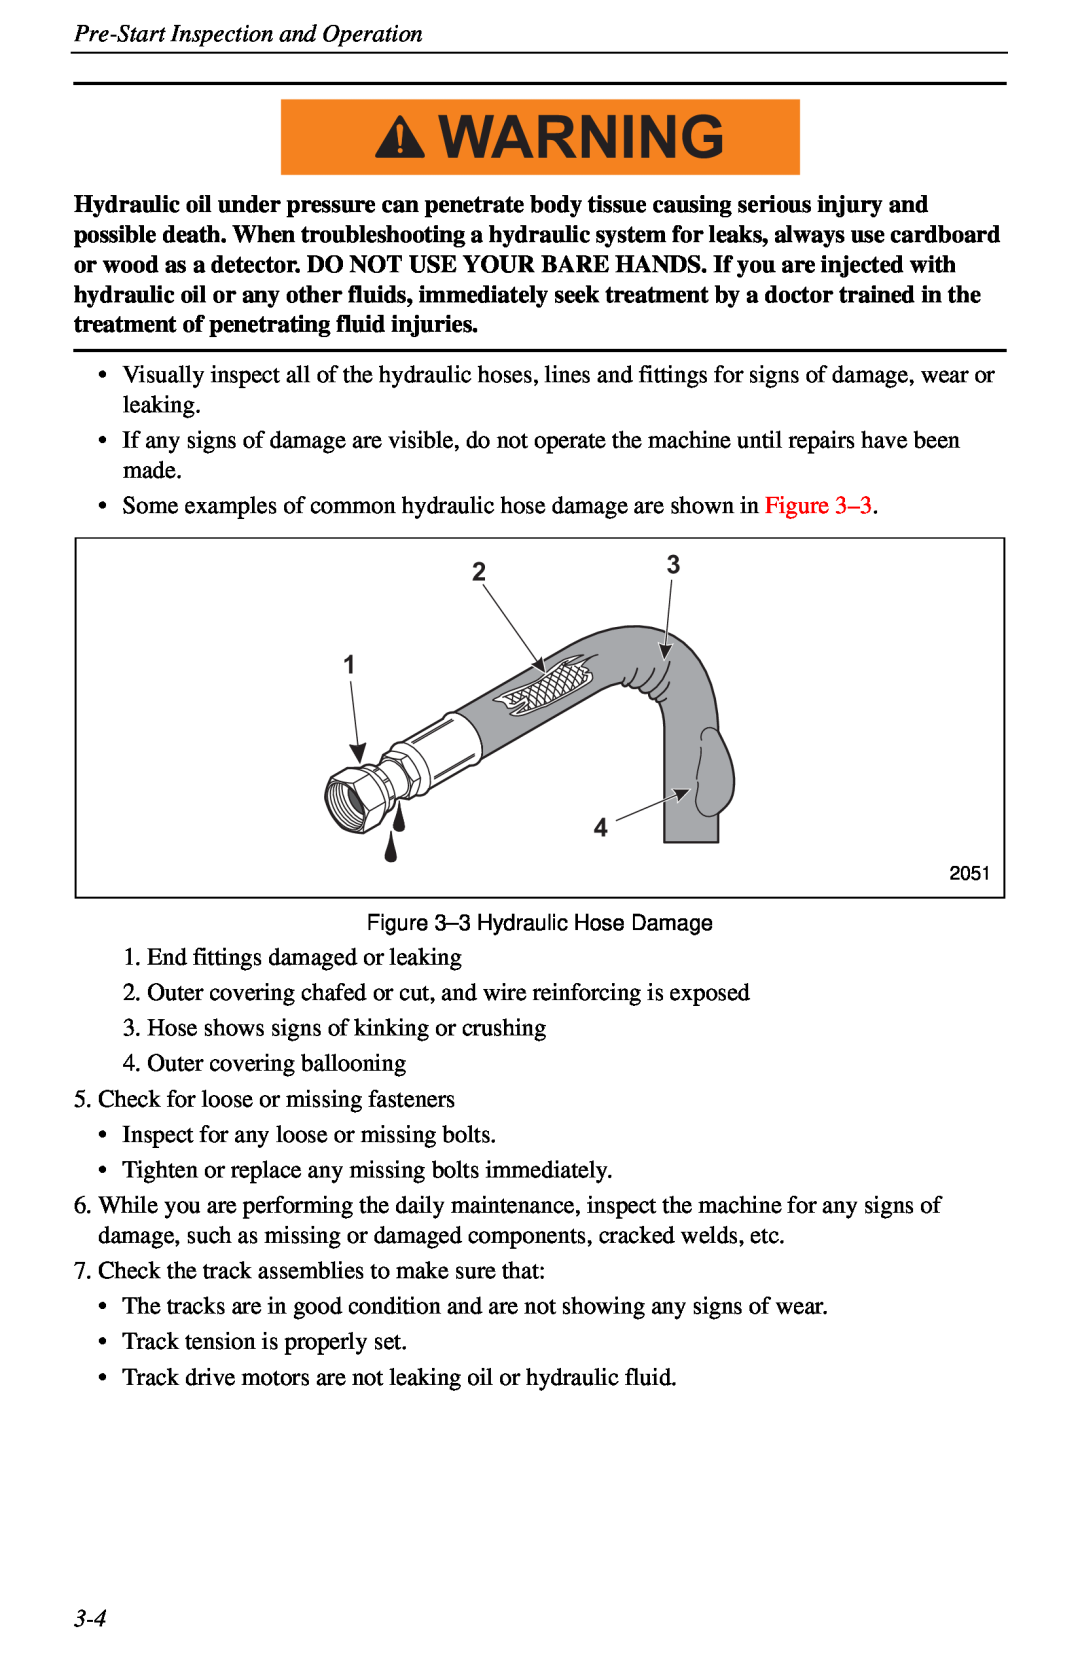 Cellboost 999-823 Pre-Start Inspection and Operation, Some examples of common hydraulic hose damage are shown in Figure 